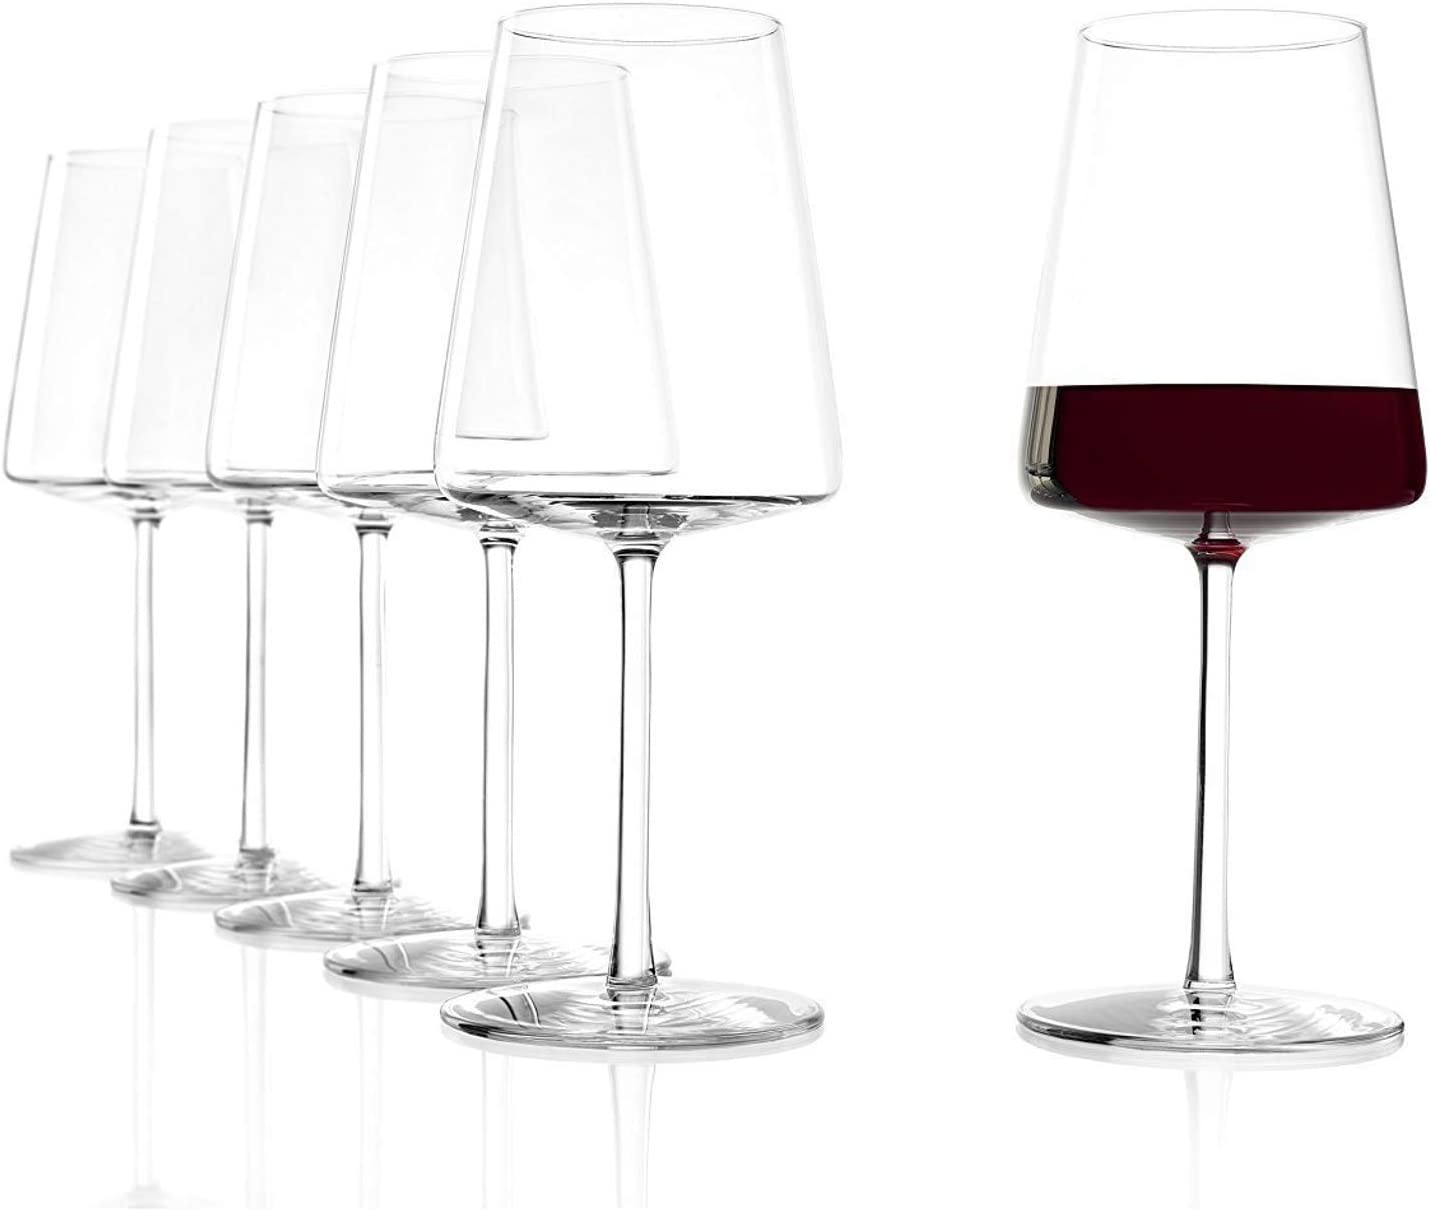 Stölzle Lausitz Red Wine Glasses Power 517 ml Set of 6 with Calibration Mark 0.2 L Ideal for Catering and Hotels